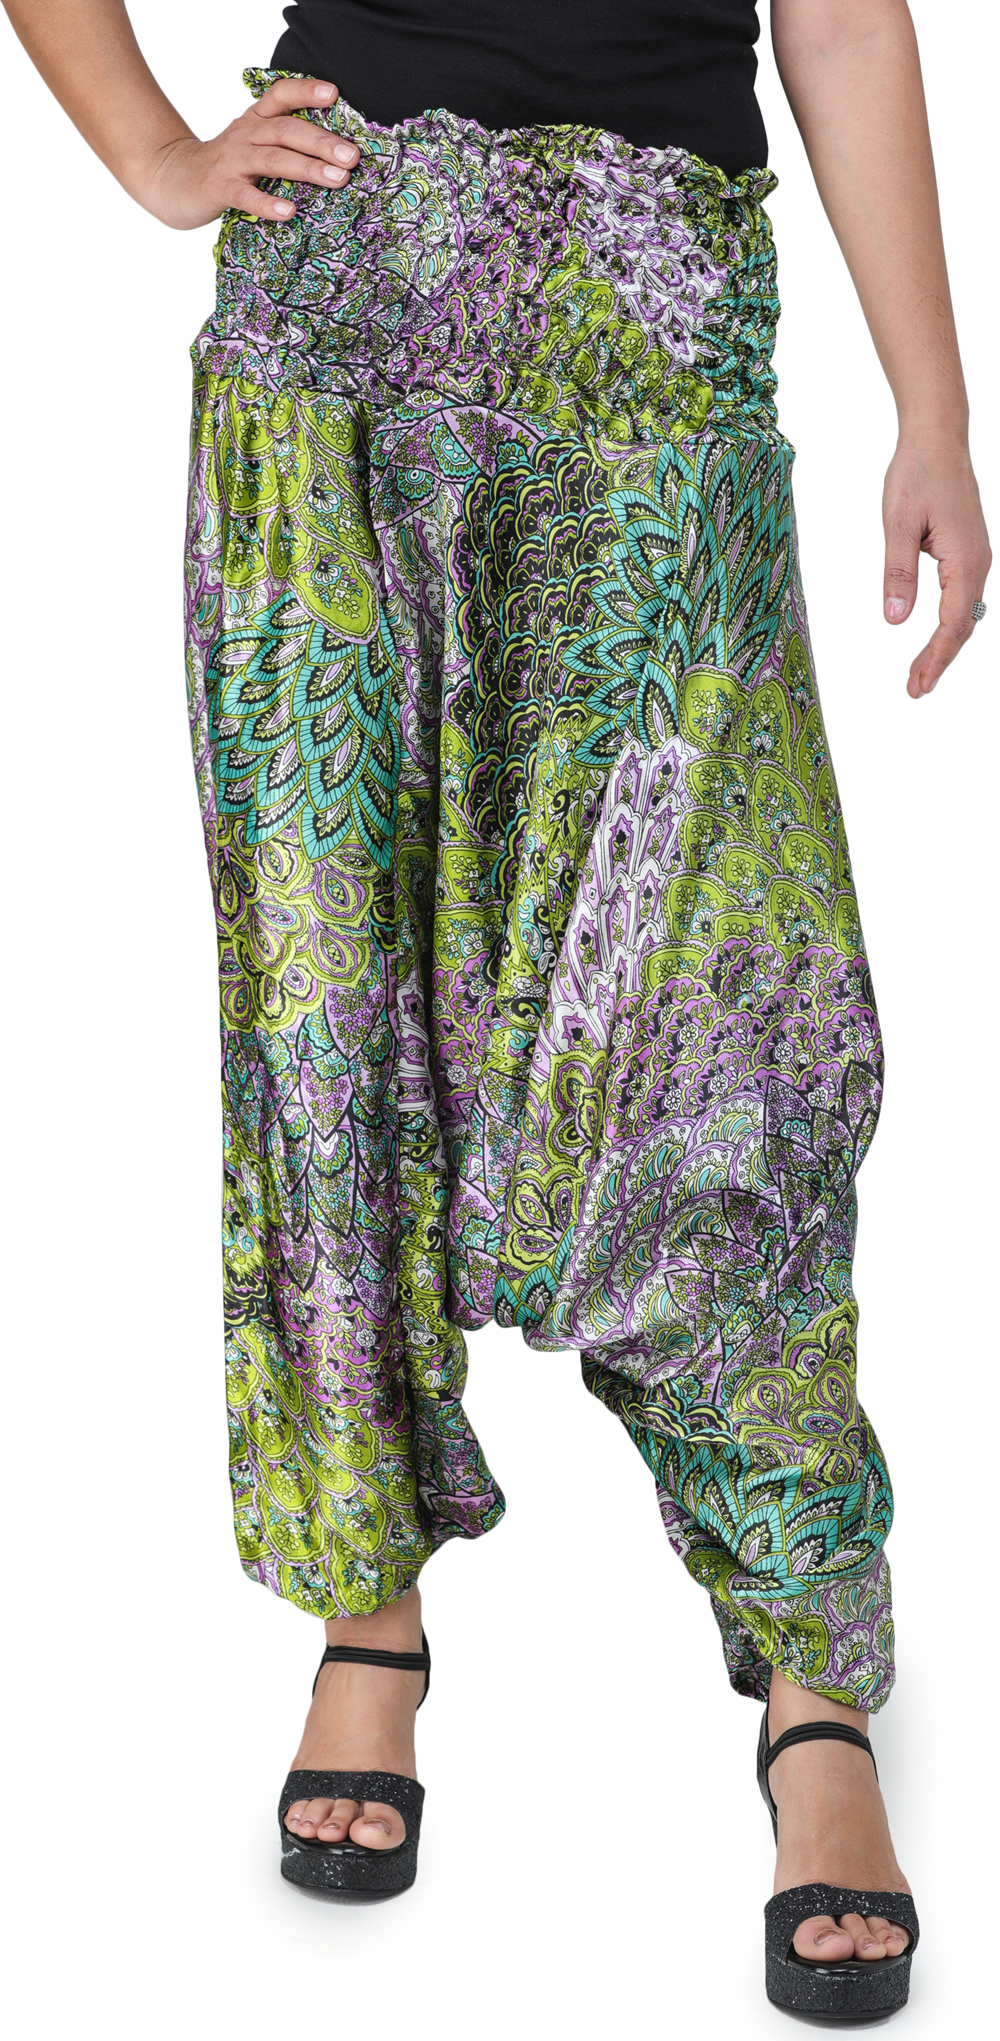 Exotic India Printed Satin Harem Trousers - Color Purple Green at Amazon  Women's Clothing store